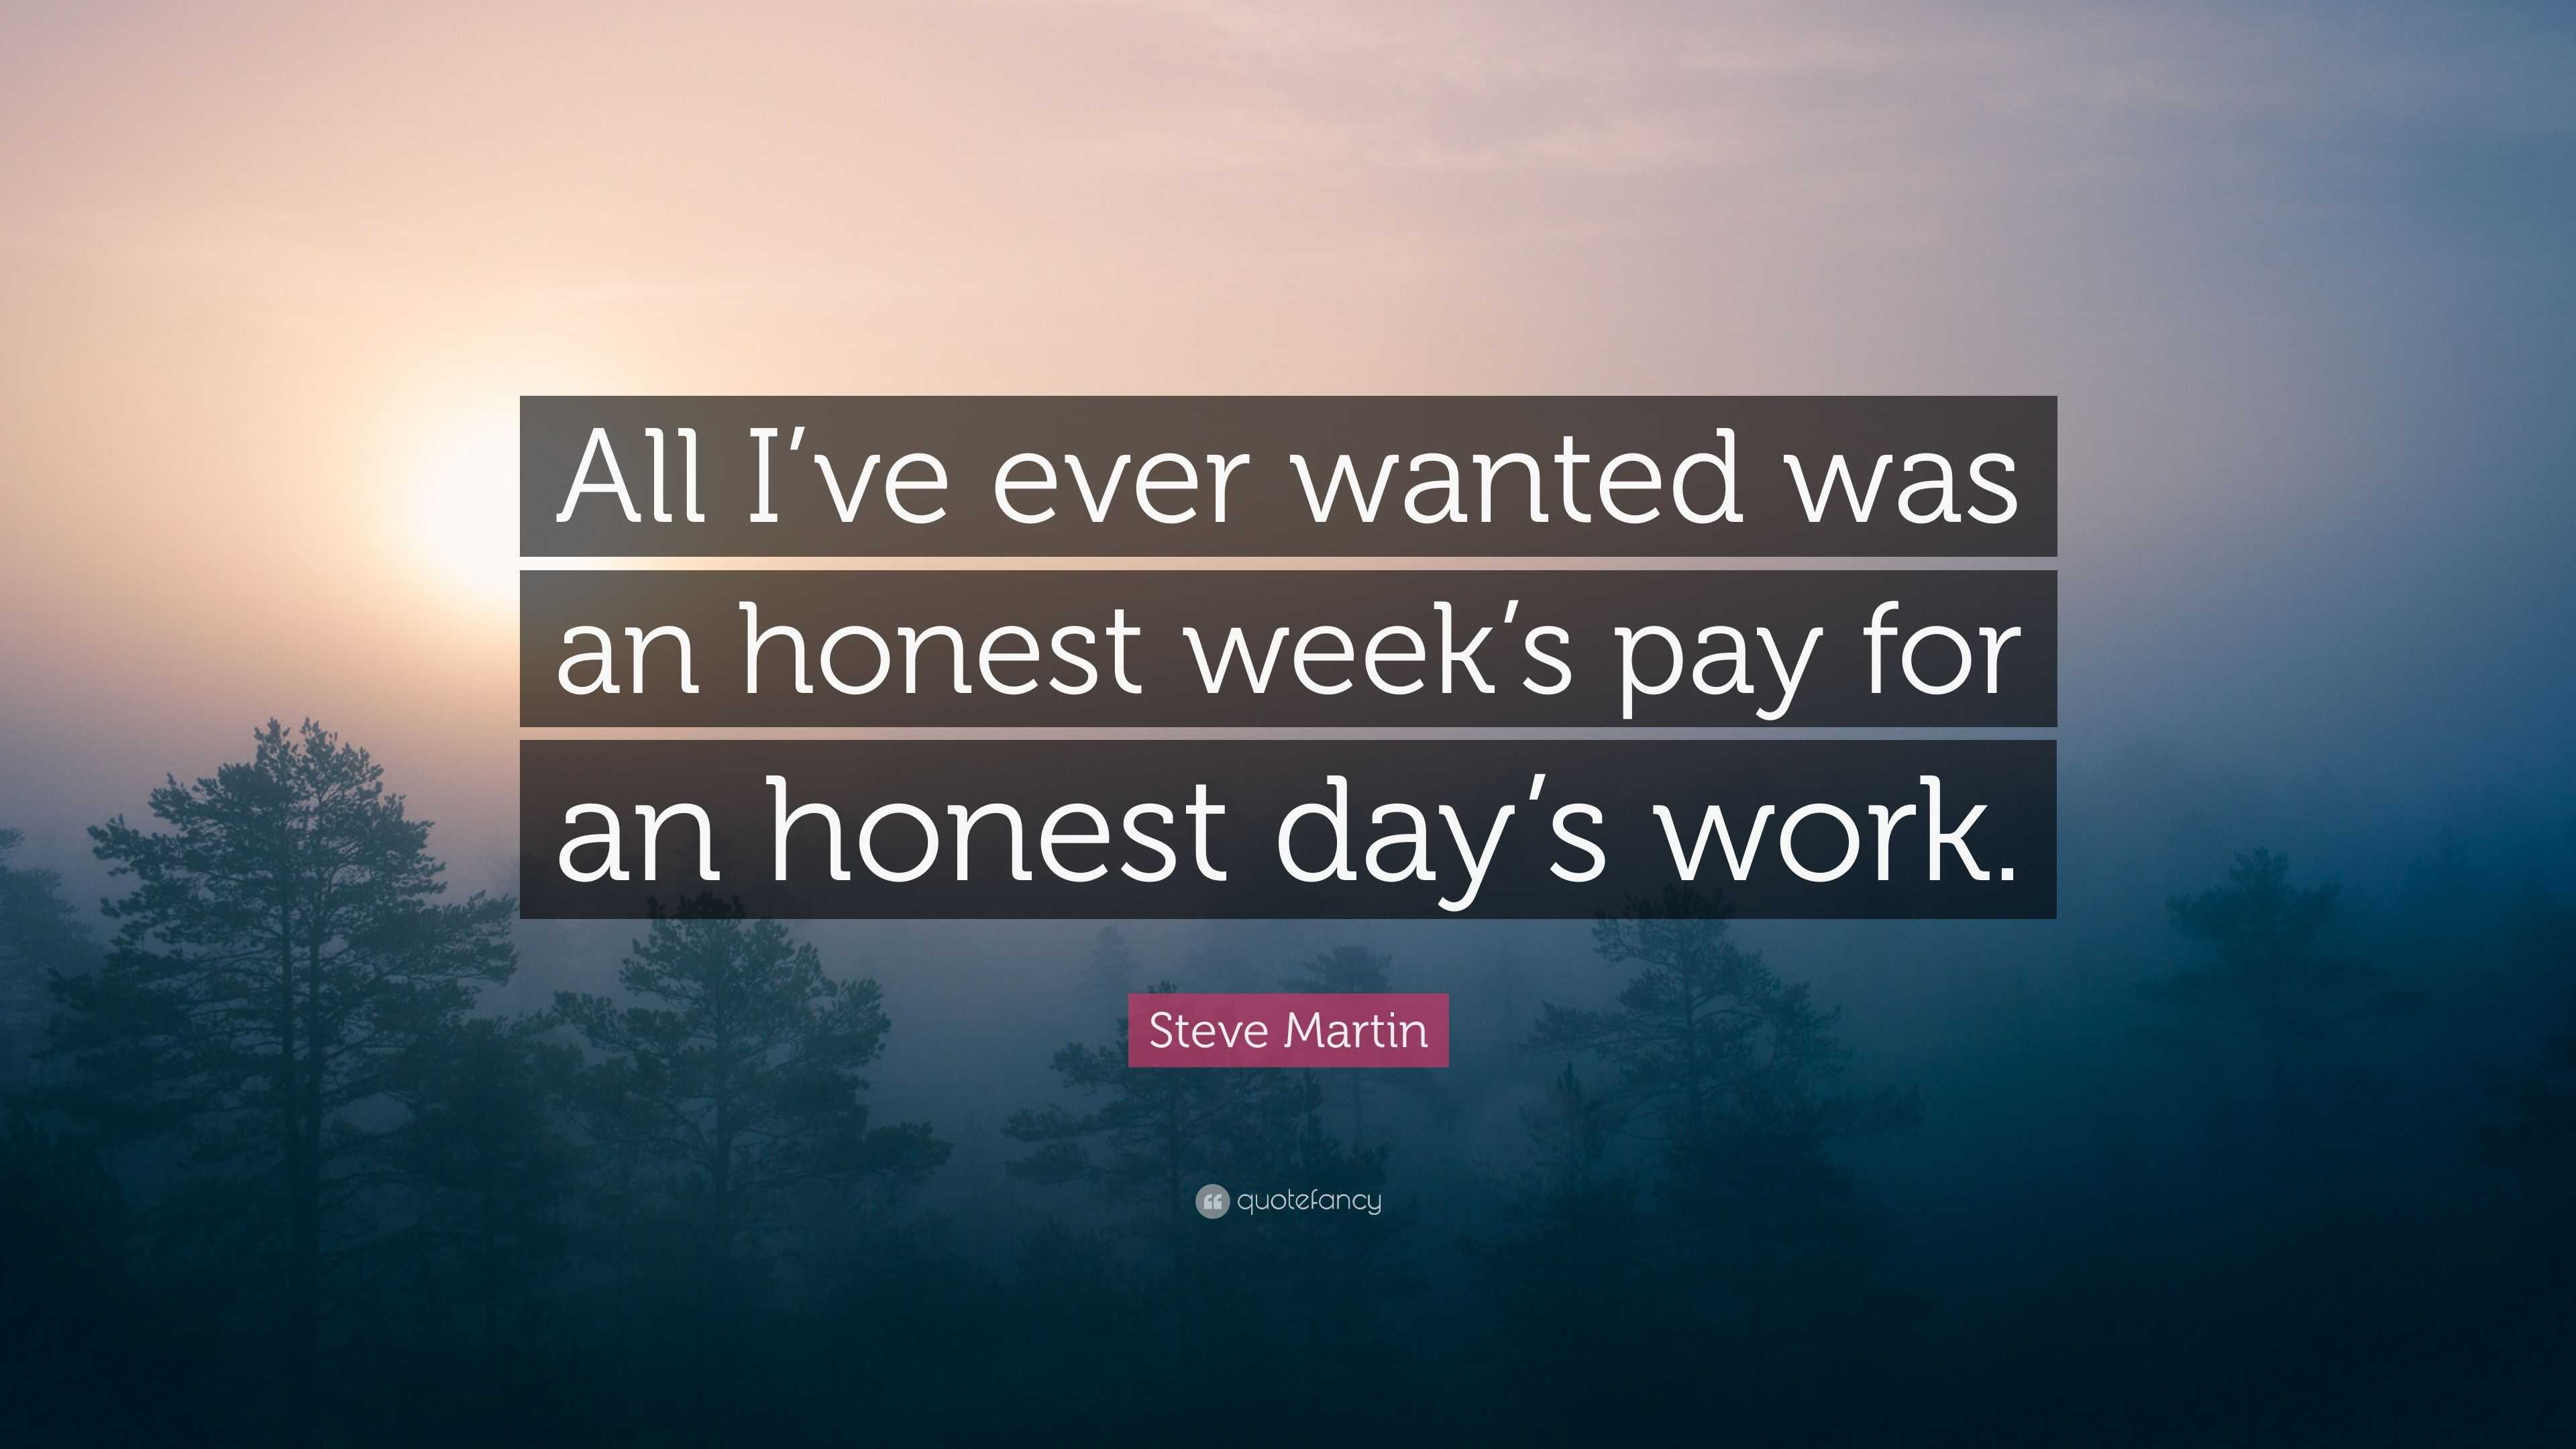 Steve Martin Quote: “All I’ve ever wanted was an honest week’s pay for